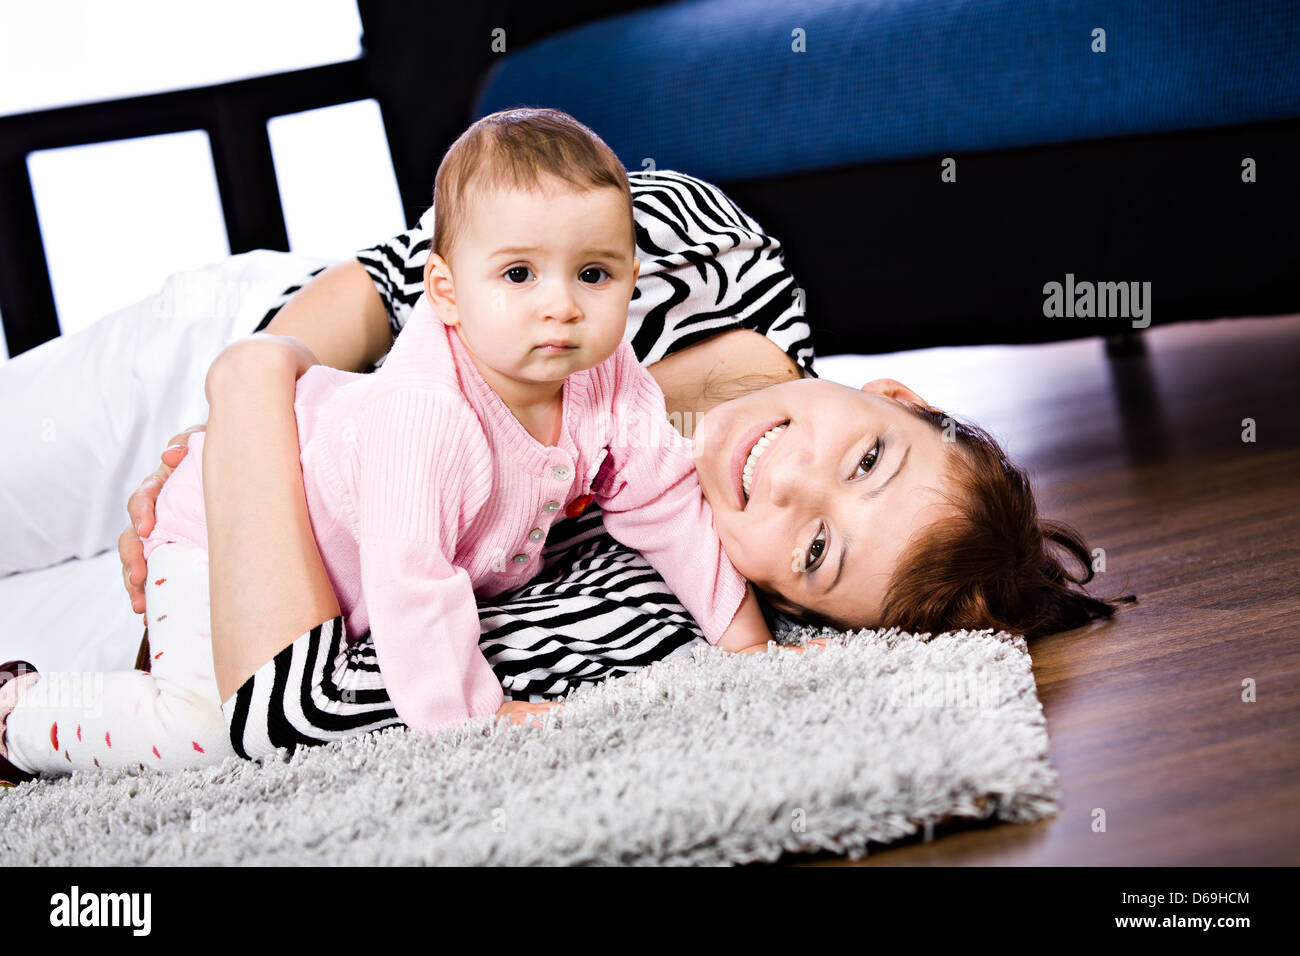 mother and daughter portrait Stock Photo